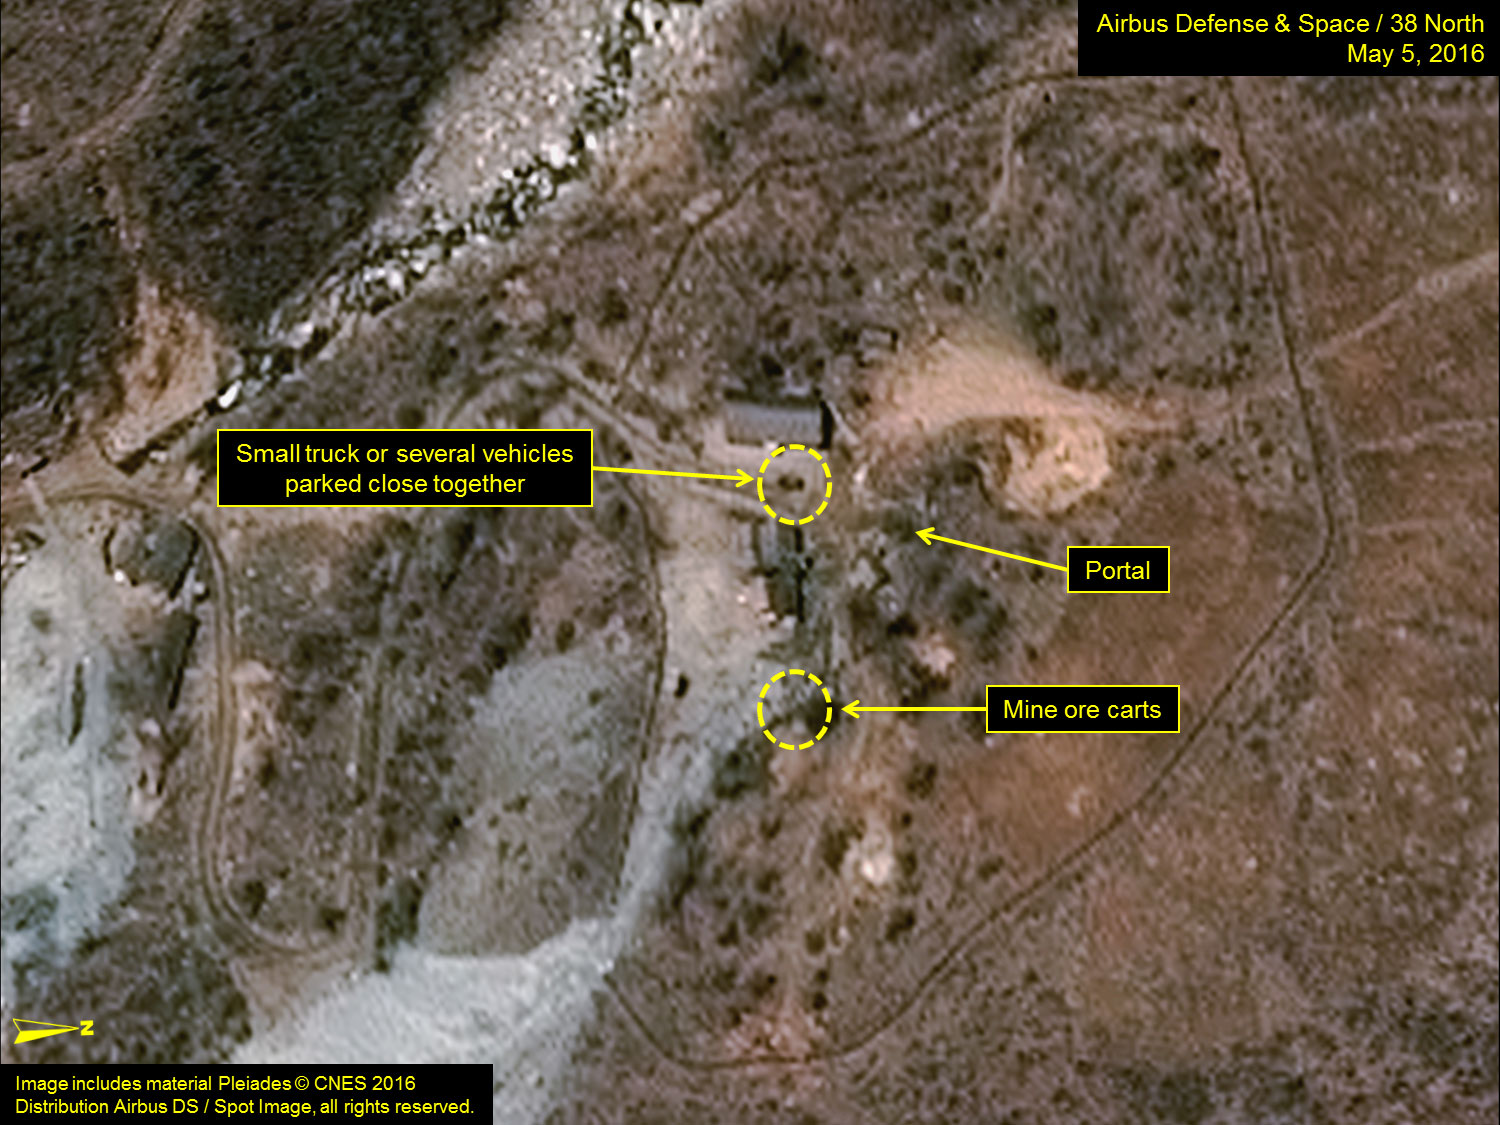 New Possible Indication of North Korean Nuclear Test Preparations